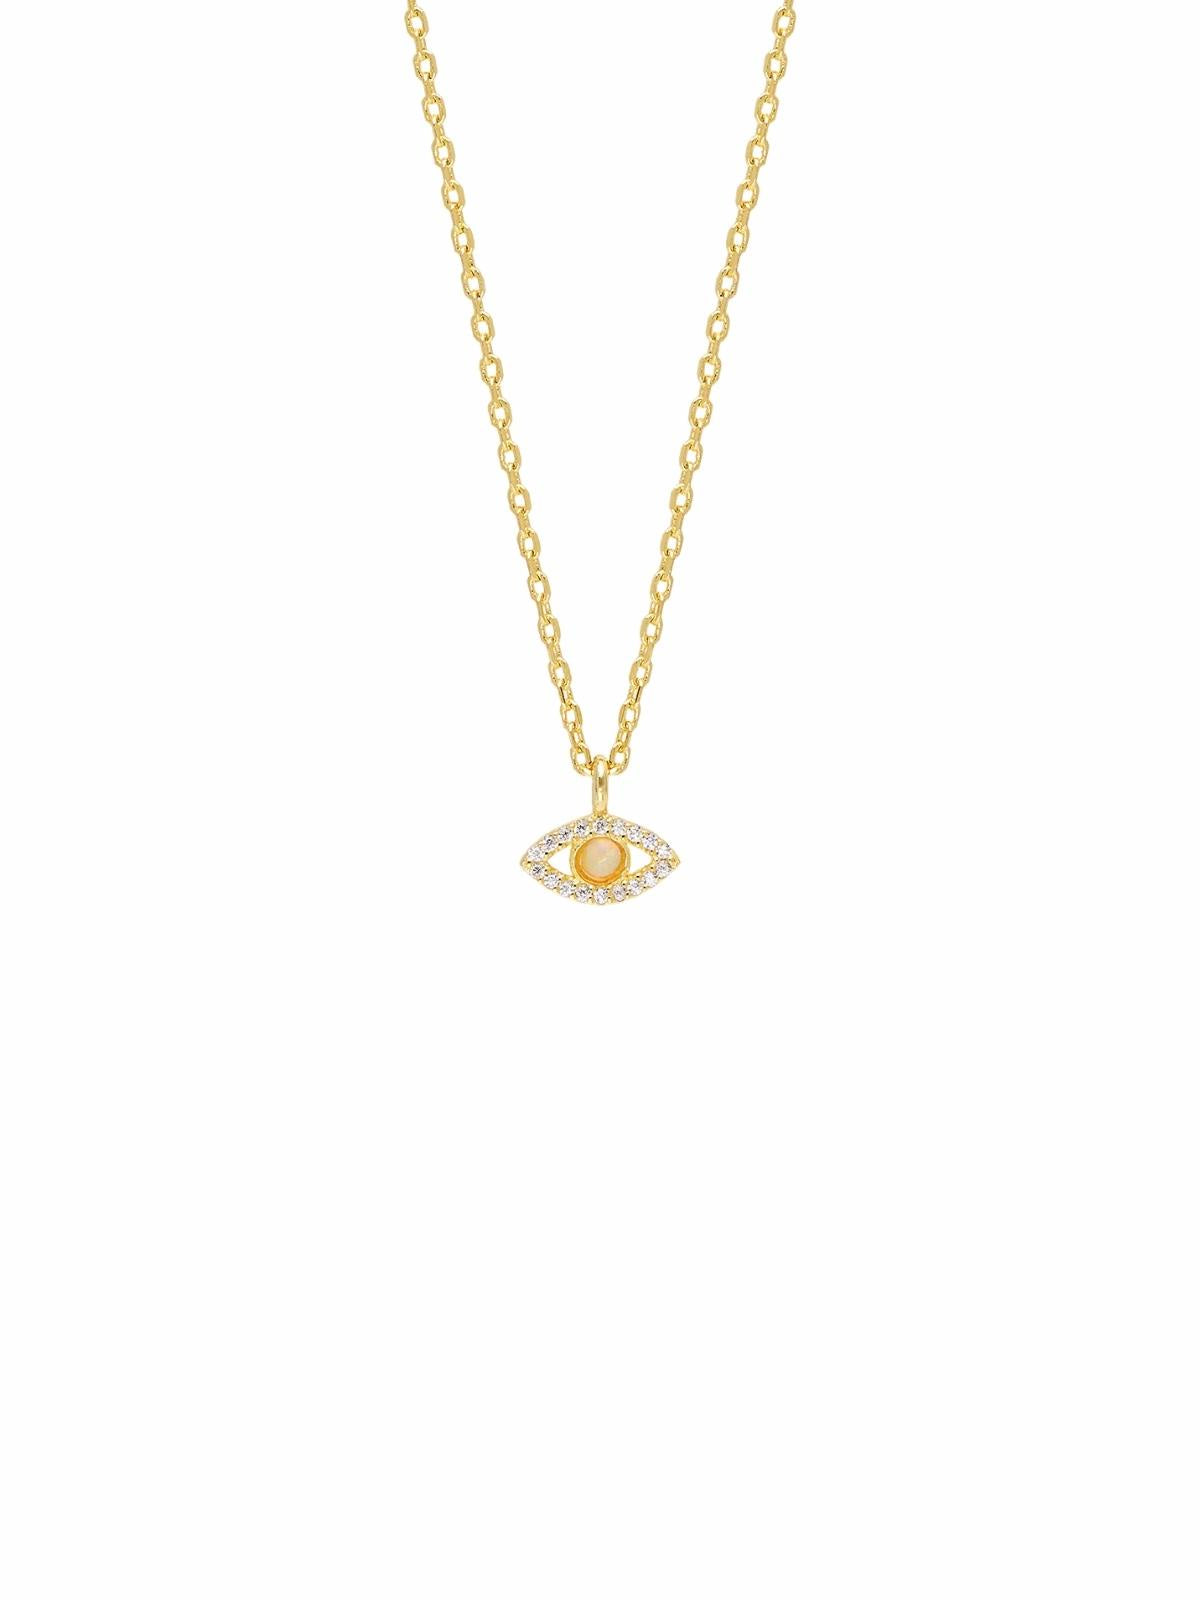 Eye Of Intuition Necklace - Gold Necklaces By Charlotte 